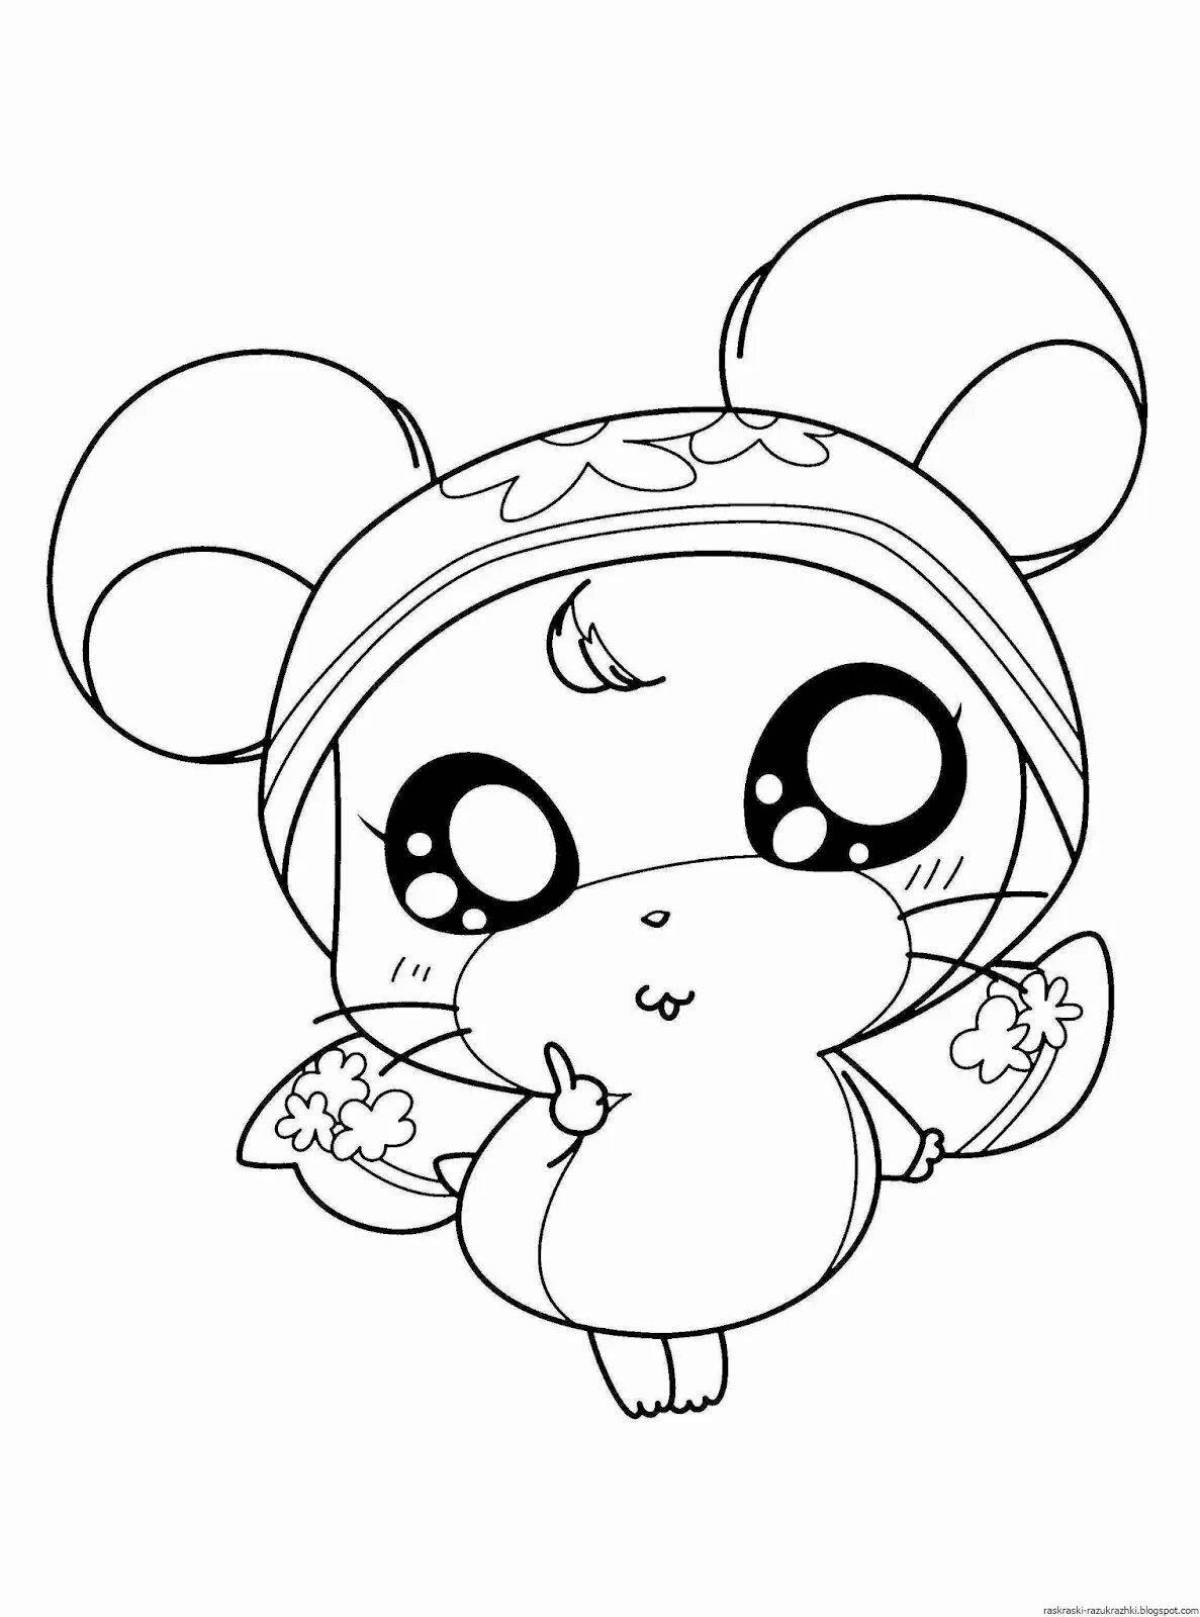 Cute cute animal coloring pages